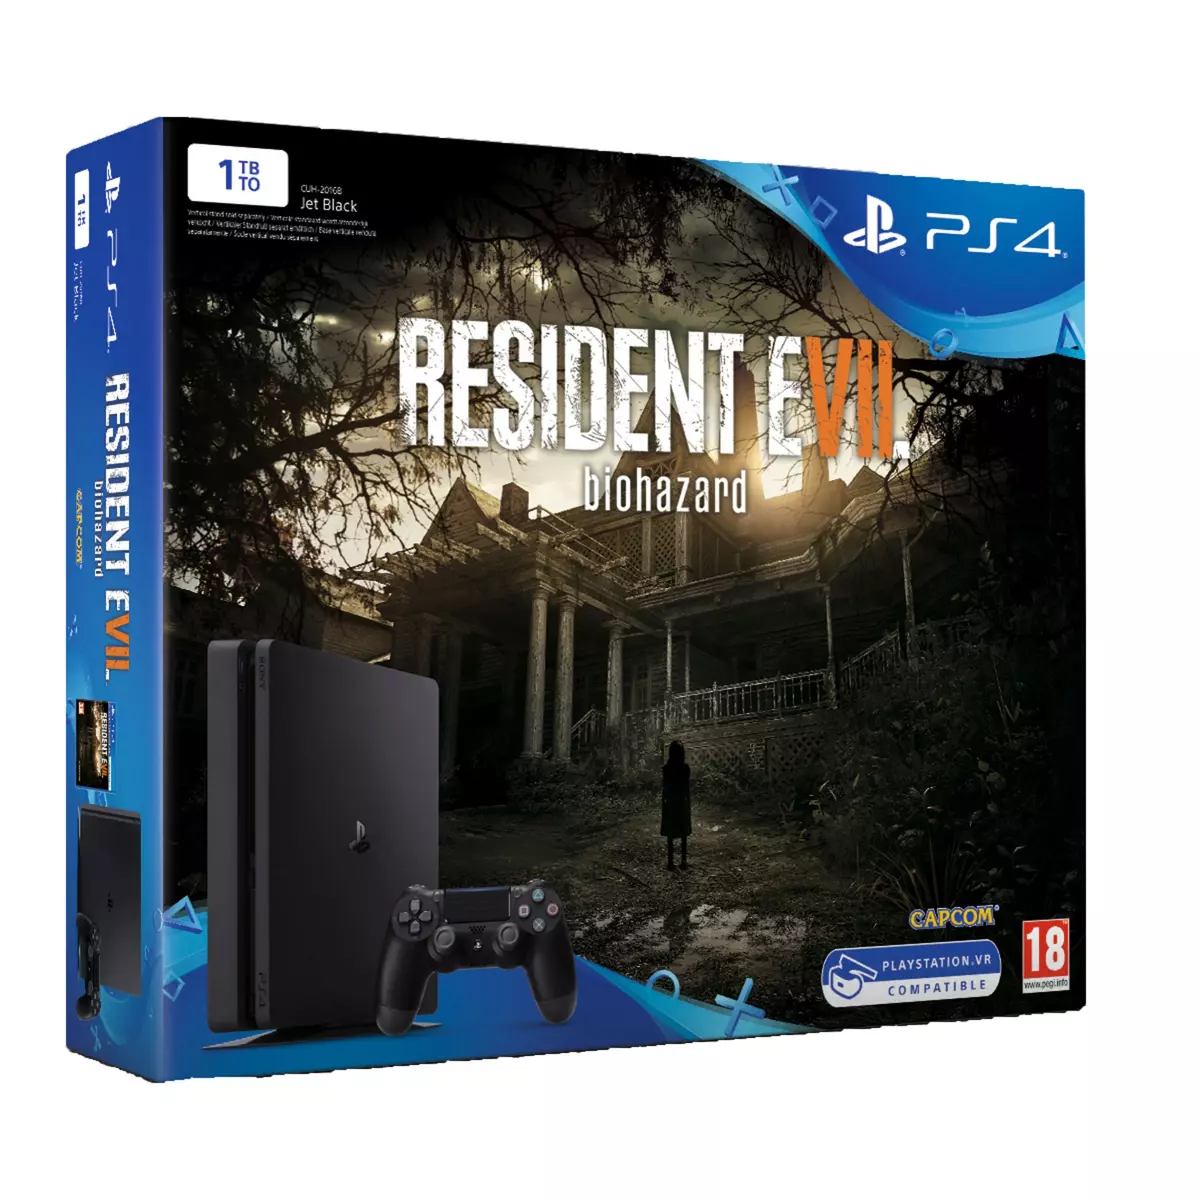 Pack Console PS4 Slim 1To - Resident Evil VII